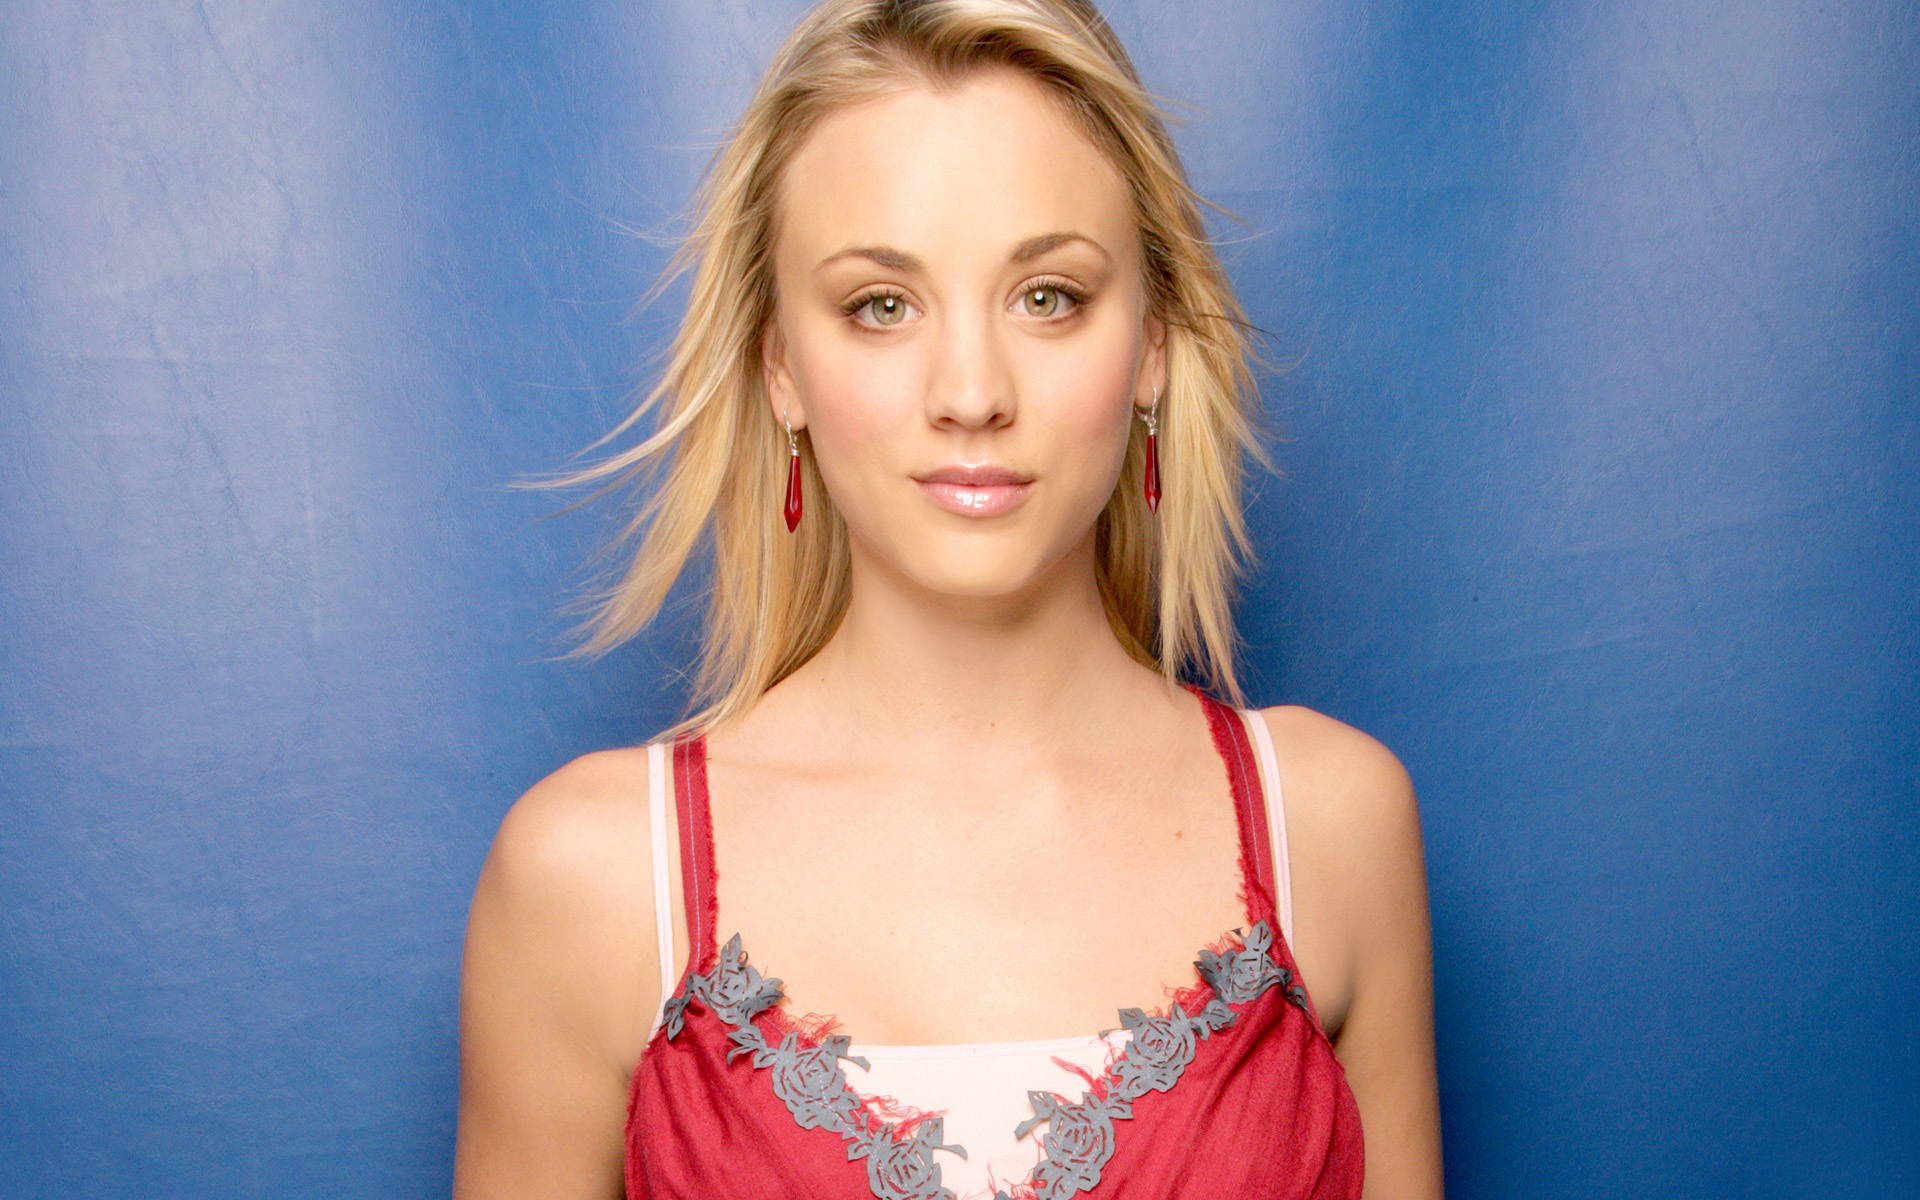 Free Download Kaley Cuoco Foto X For Your Desktop Mobile Tablet Explore Kaley